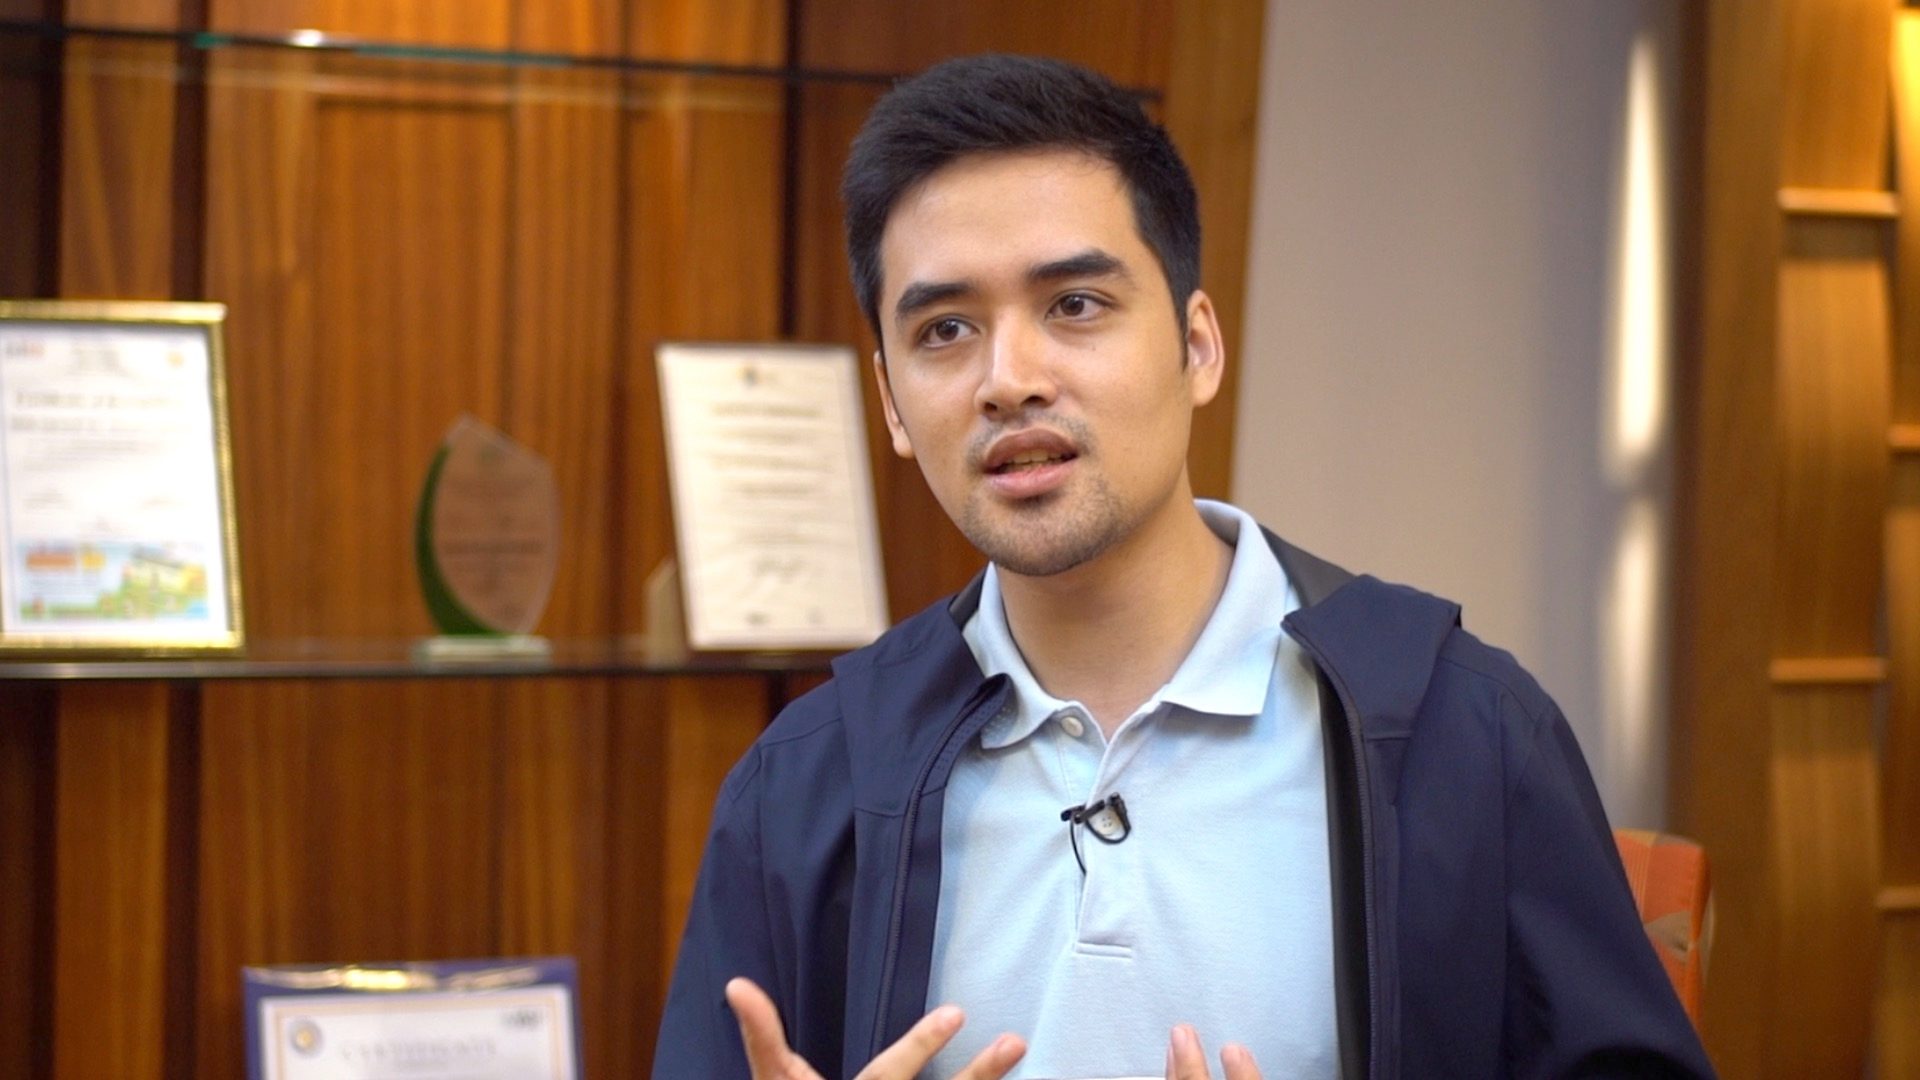 ‘They’re not criminals’: Vico Sotto backs arrested workers in labor strike